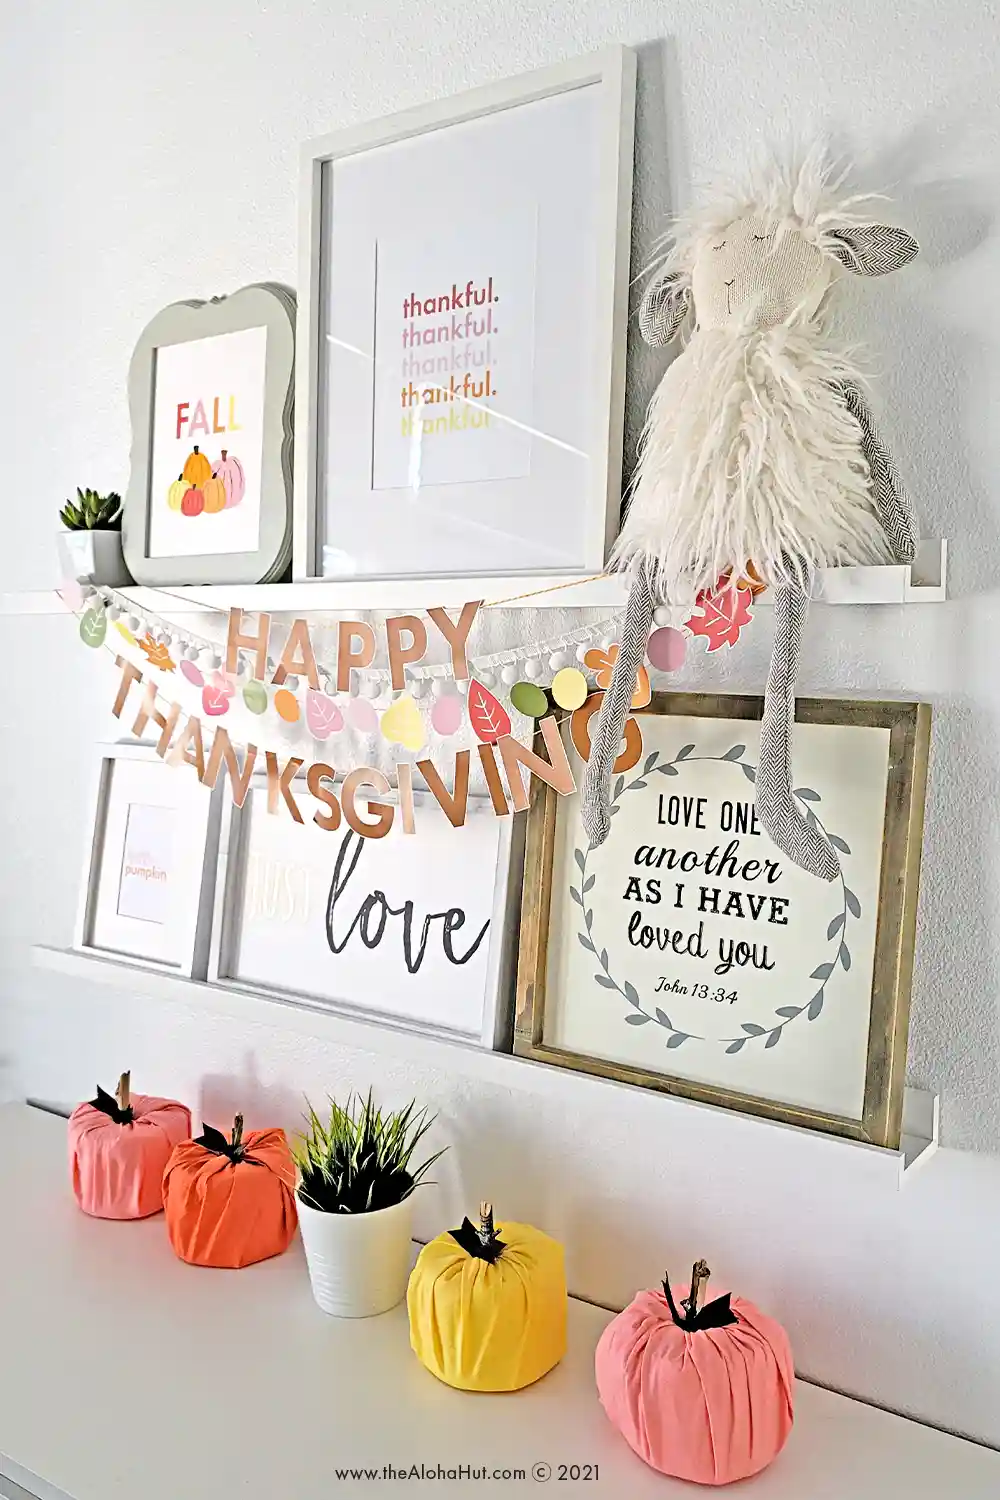 Printable Fall art prints and Thanksgiving art prints for easy DIY decor on a budget this Fall. Also has easy DIY garlands that say Happy Thanksgiving and then a garland of colorful Fall leaves.